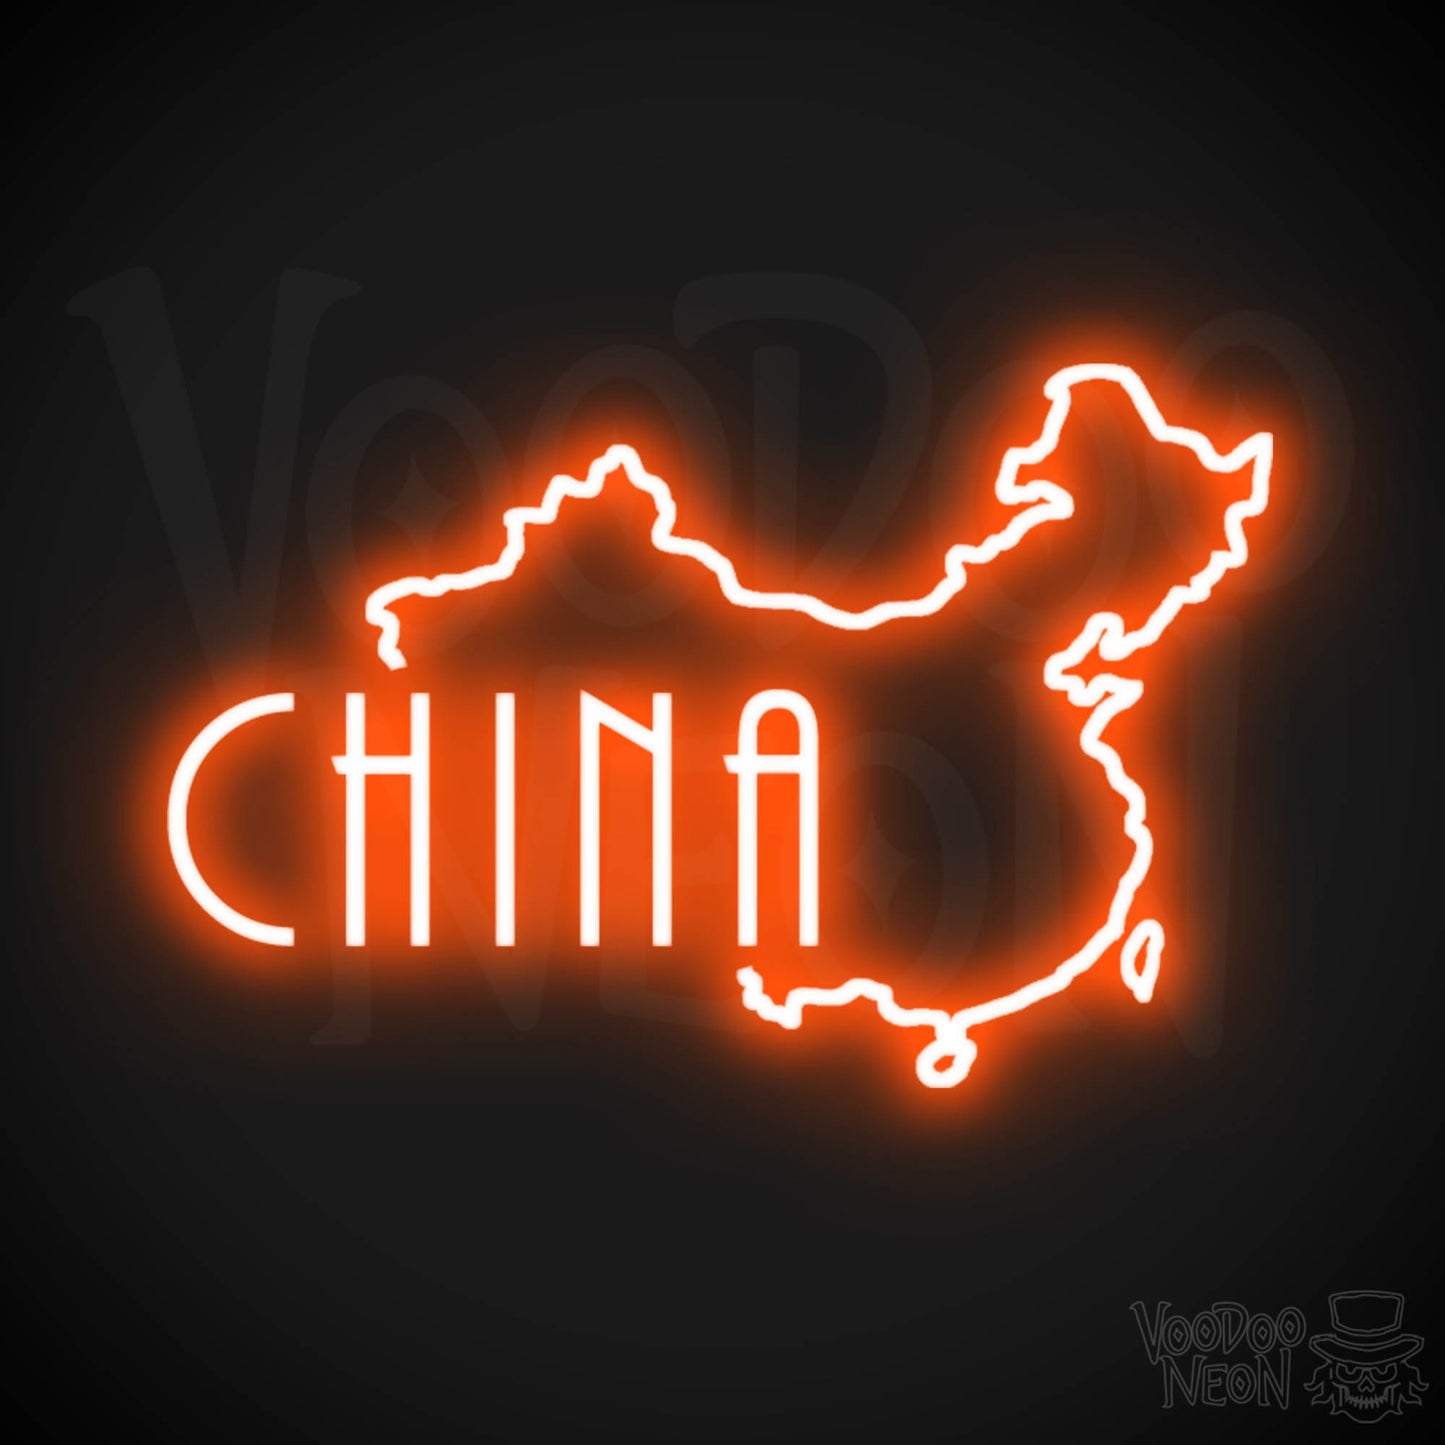 China Neon Sign - Neon China Sign - LED Sign - Color Orange